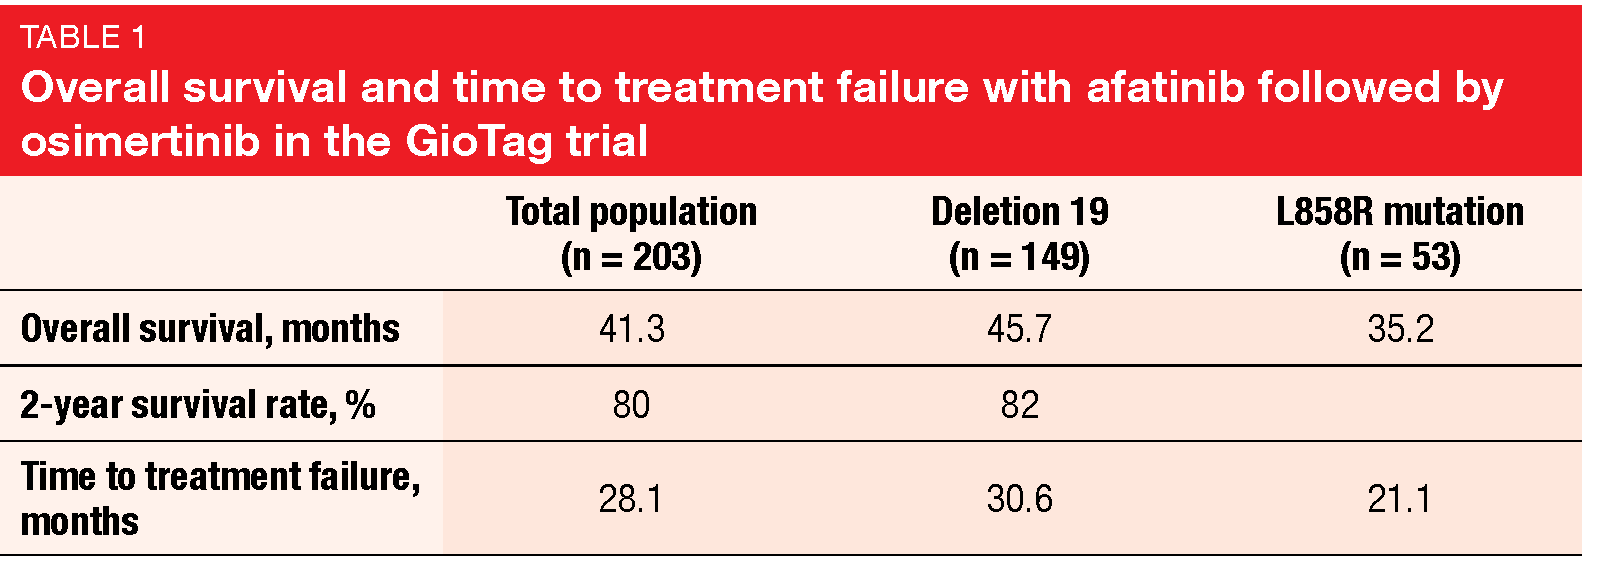 Overall survival and time to treatment failure with afatinib followed by osimertinib in the GioTag trial